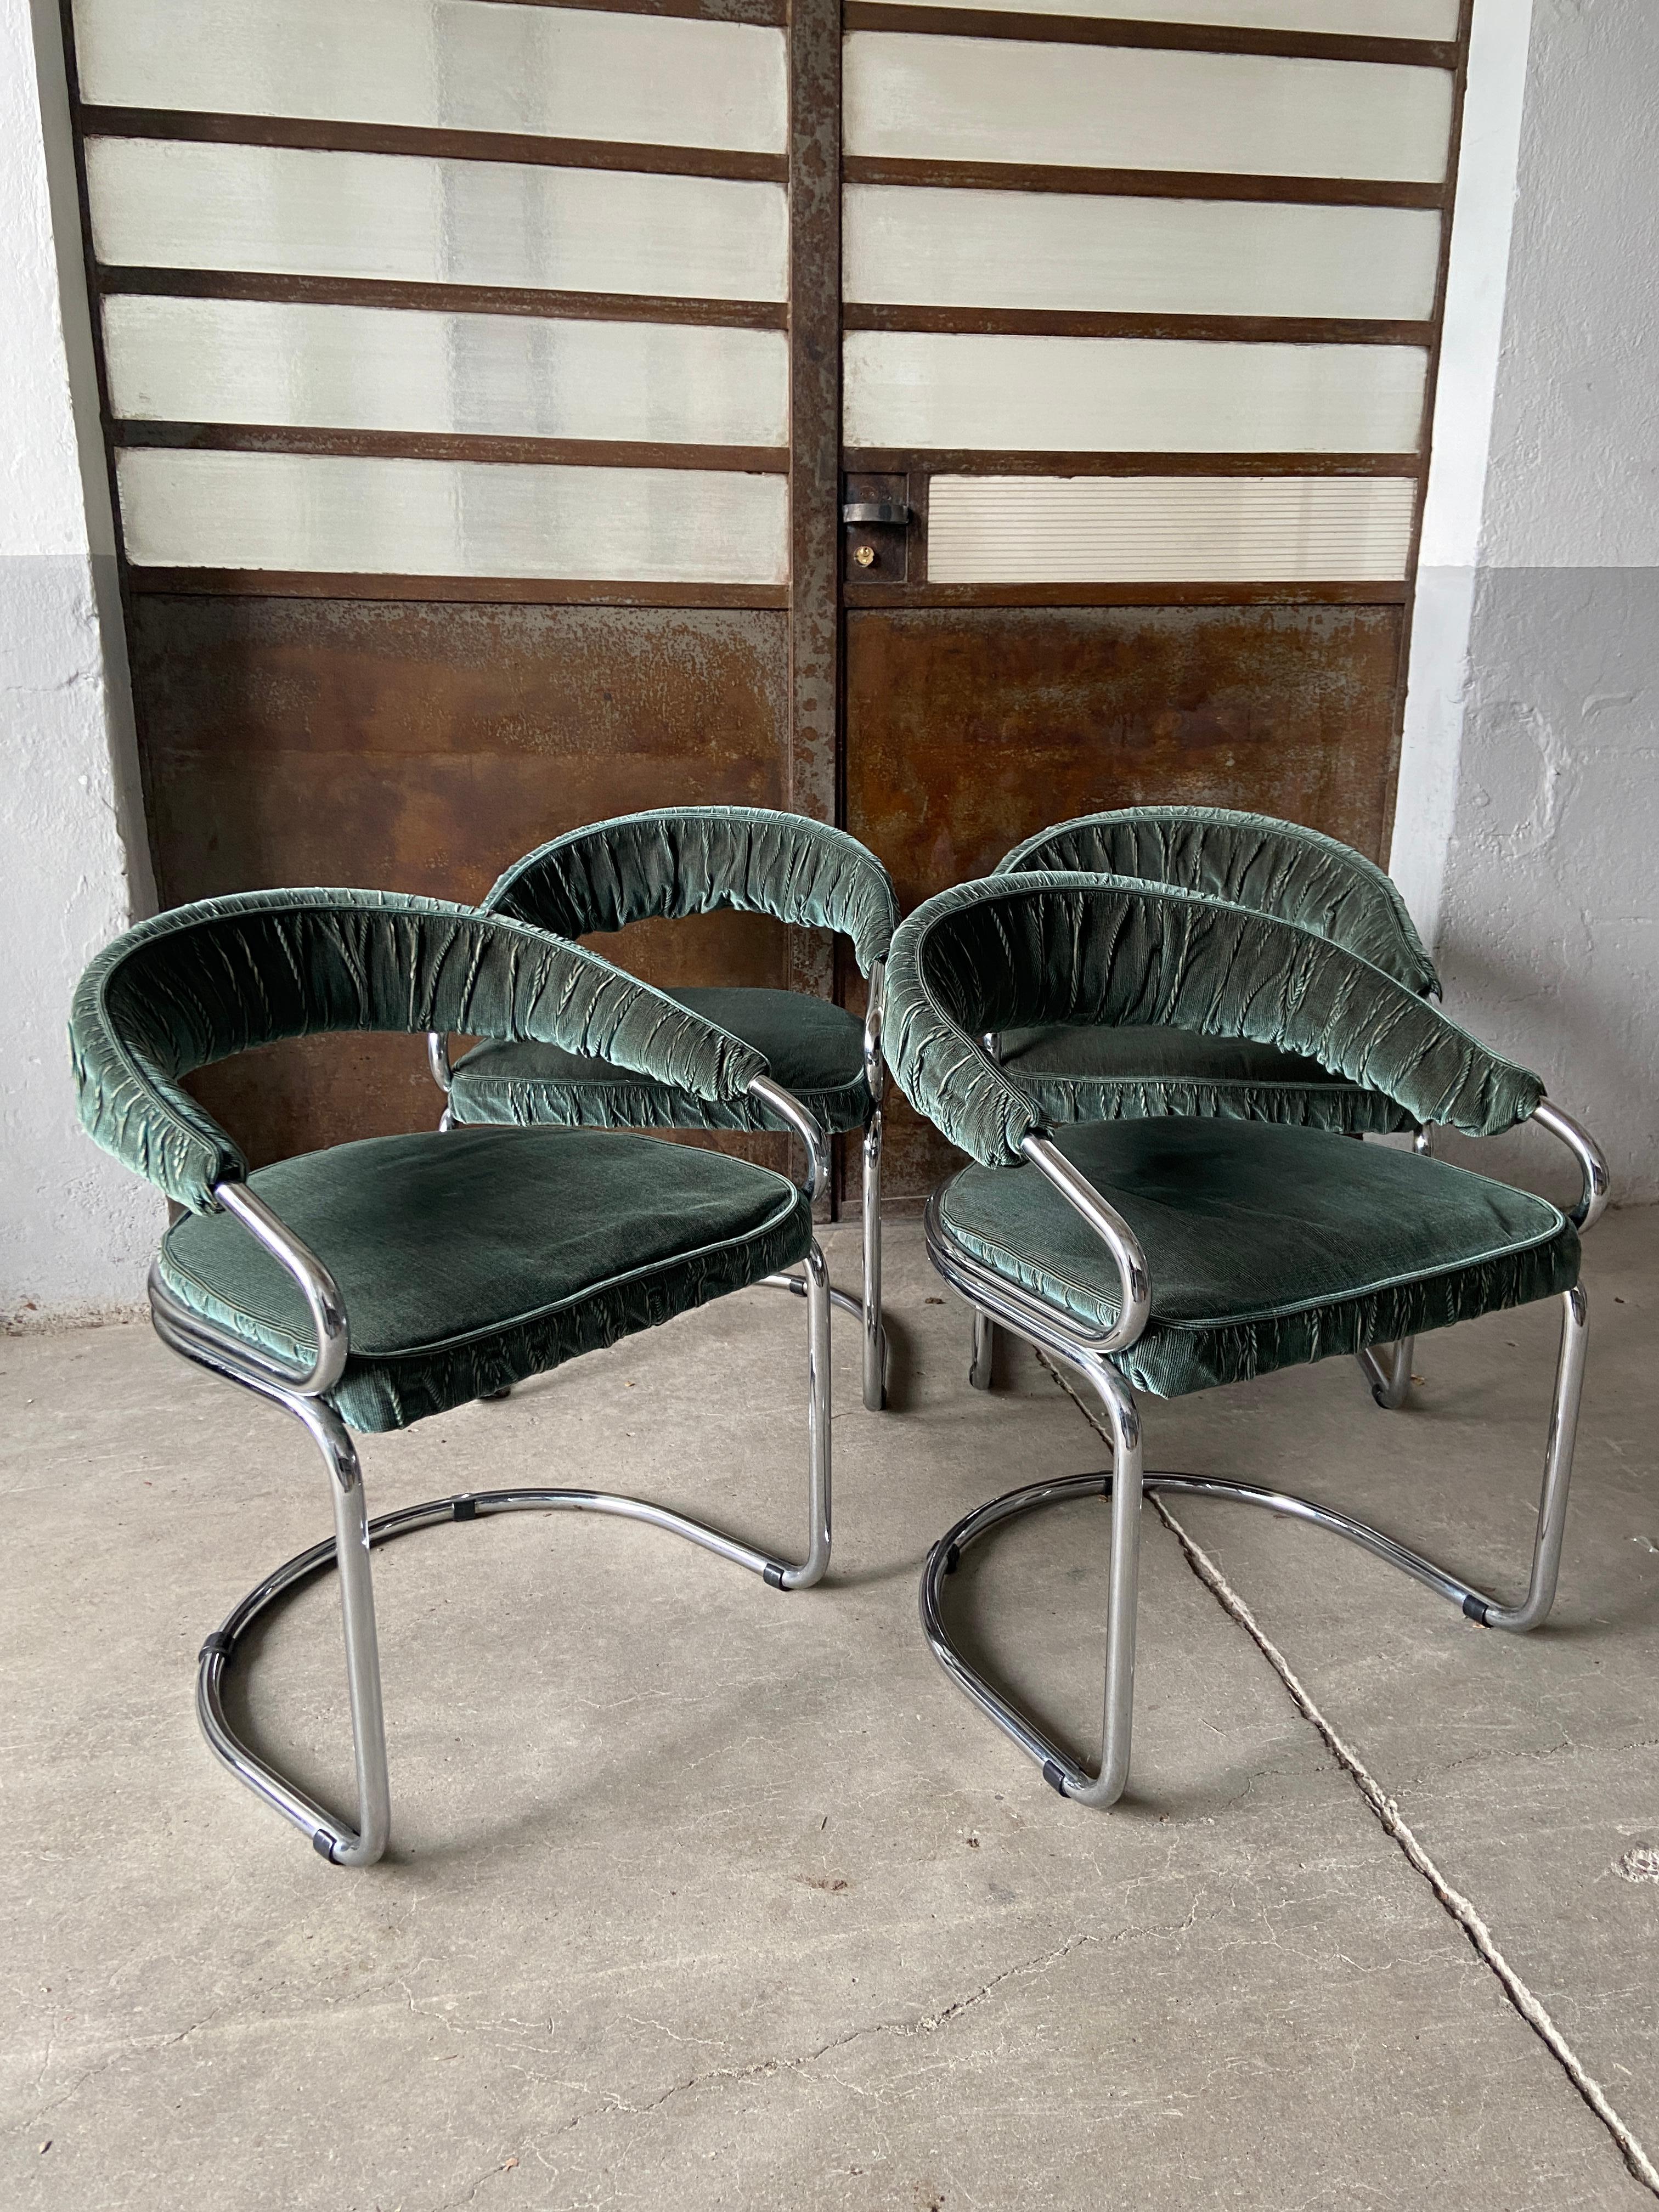 Mid-Century Modern Italian set of four Giotto Stoppino dining or desk chairs with original velvet cover and chrome cantilever structure from 1970s.
The chairs are in really good vintage conditions.